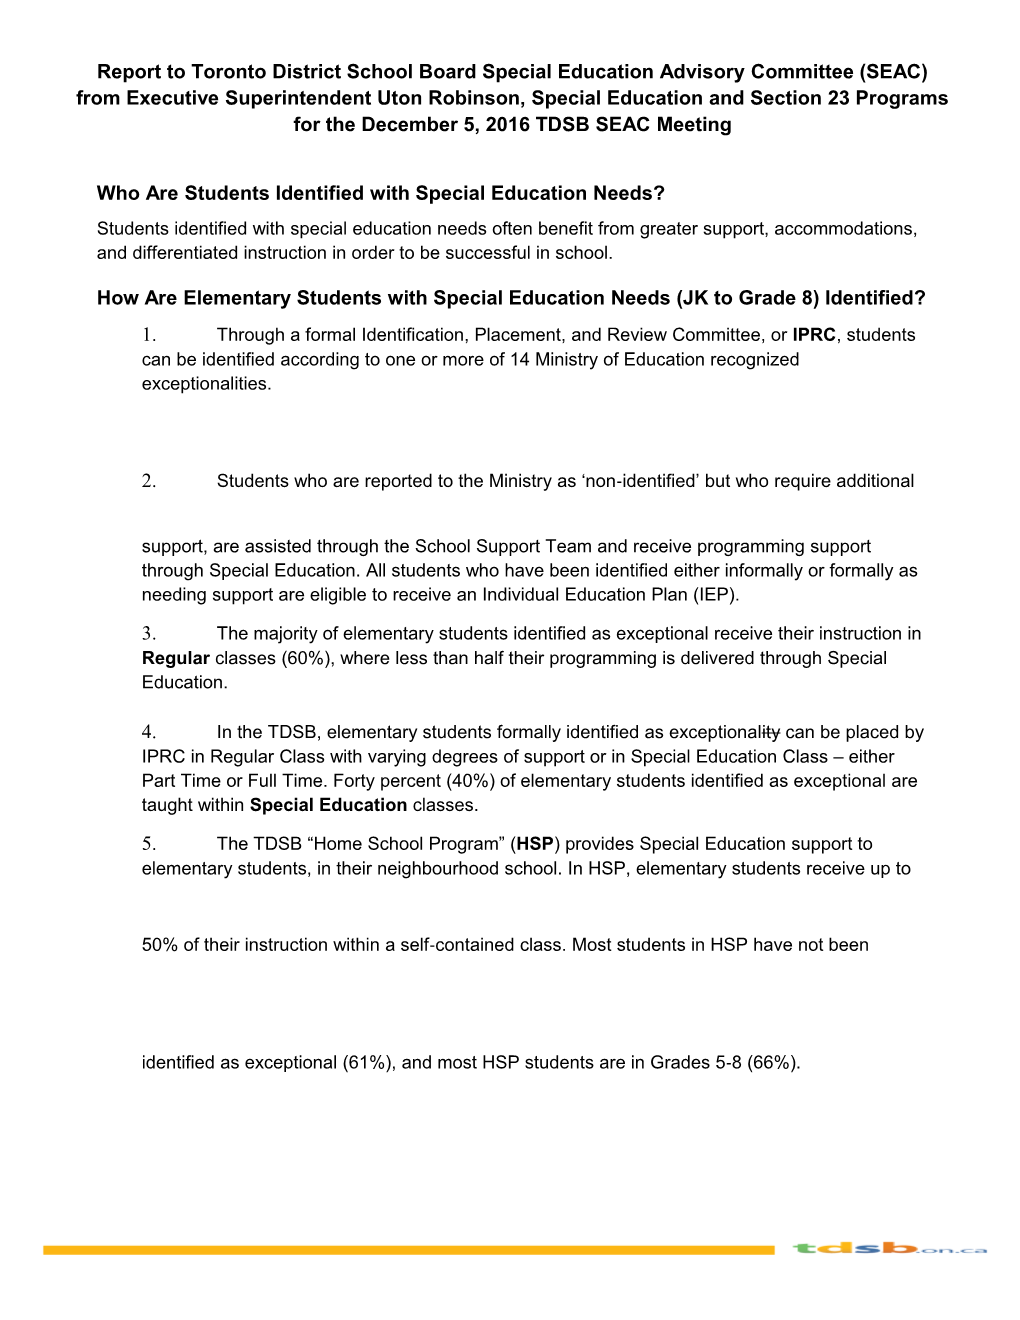 Report to Toronto District School Board Special Education Advisory Committee (SEAC) From